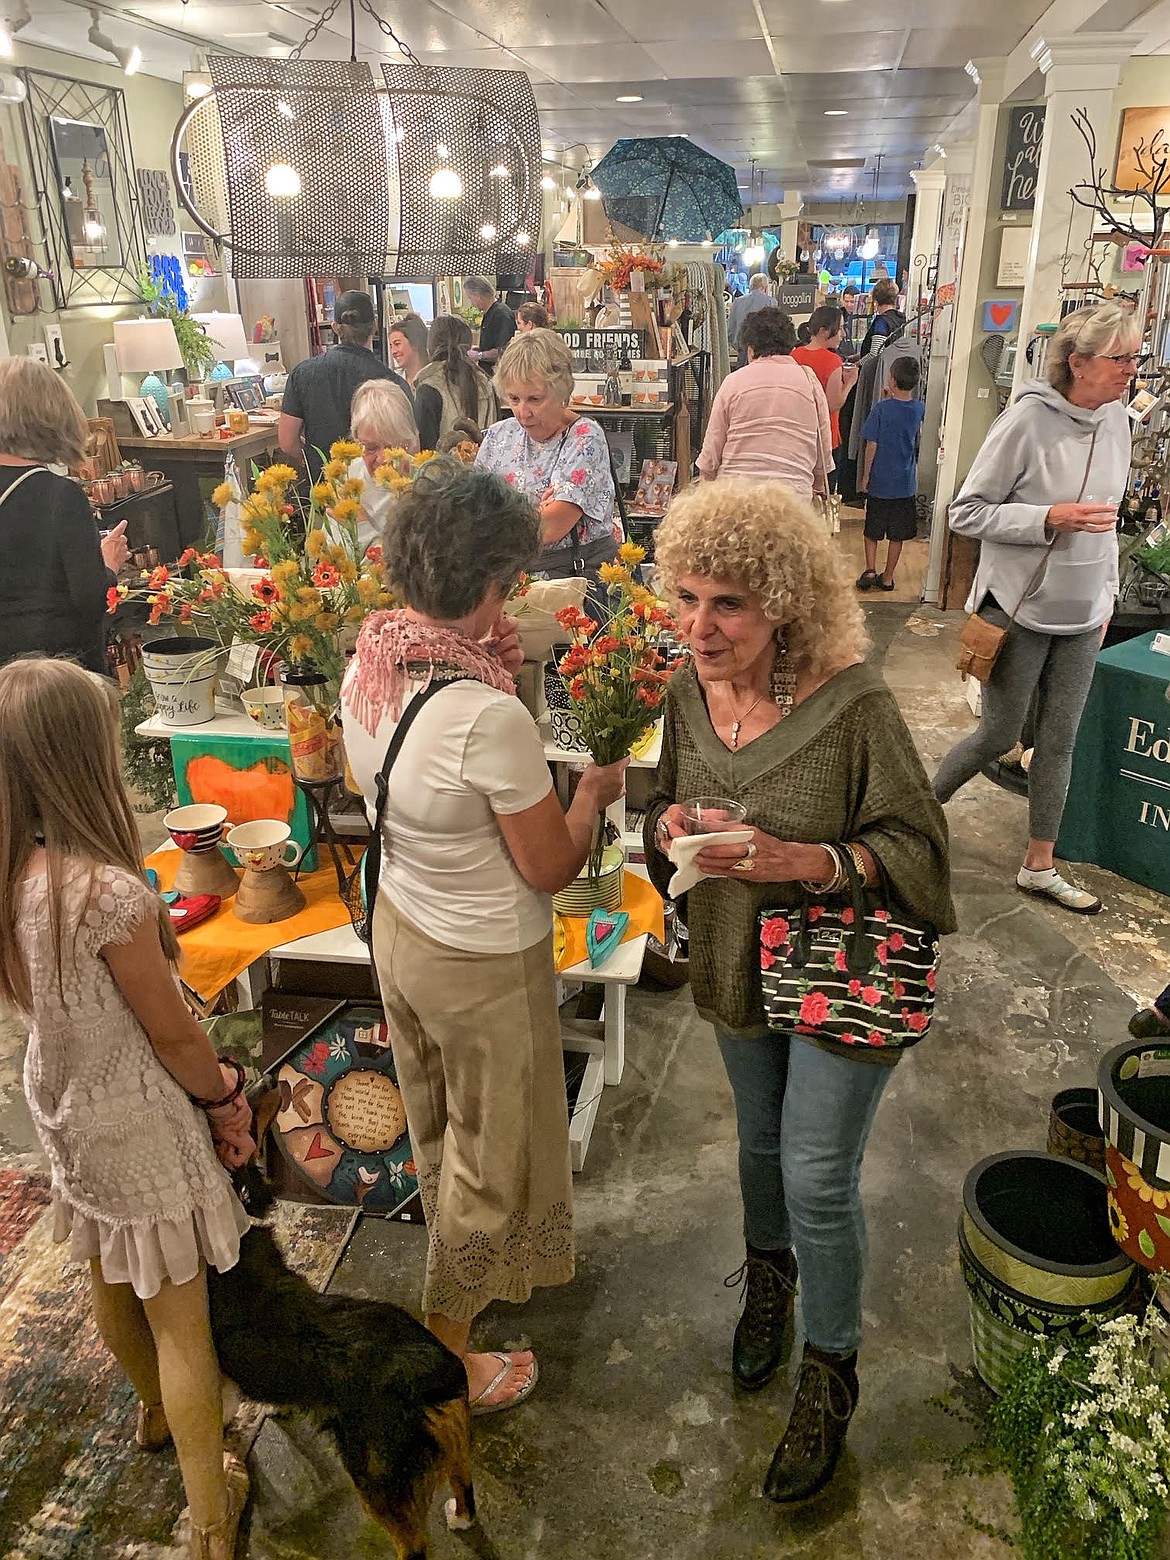 ArtWalk participants gather in Mix It Up on Sherman Avenue last summer. The Coeur d’Alene Arts and Culture Alliance announced live summer concerts and events will take place this summer, beginning with an ArtWalk from 5 to 8 tonight. (Courtesy photo)